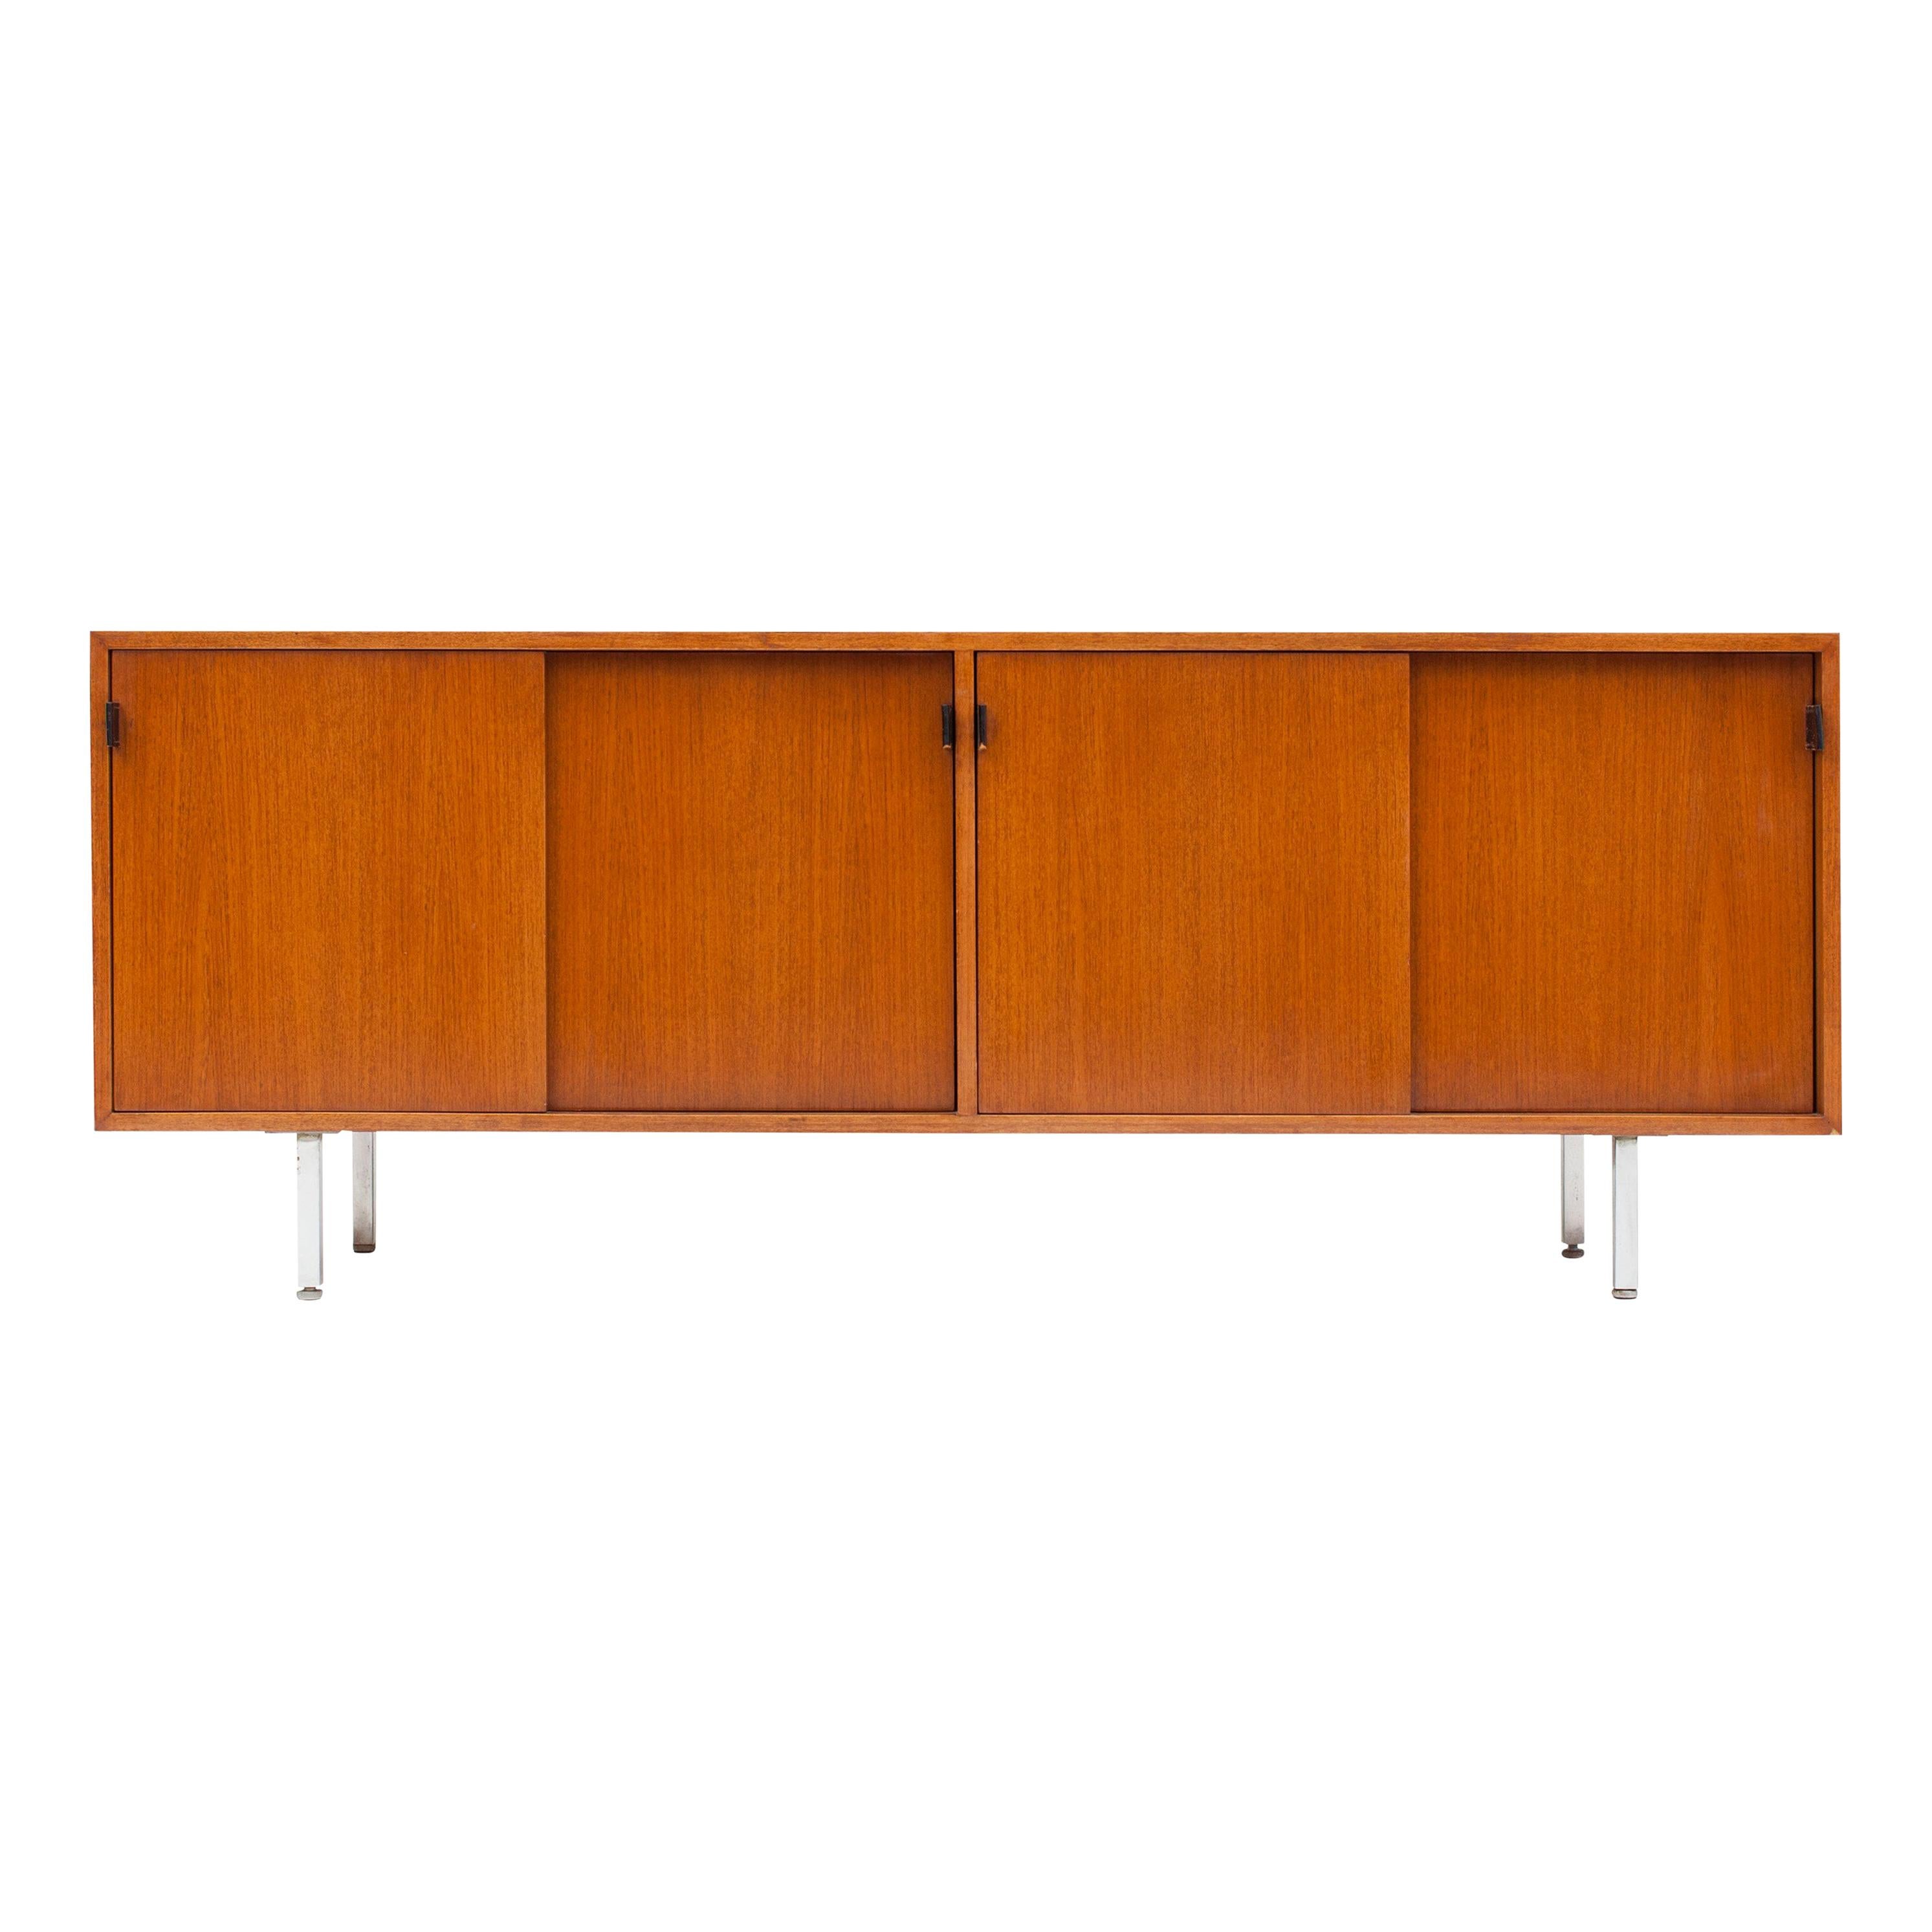 Florence Knoll Credenza in Teak, Manufactured by De Coene, 1950s